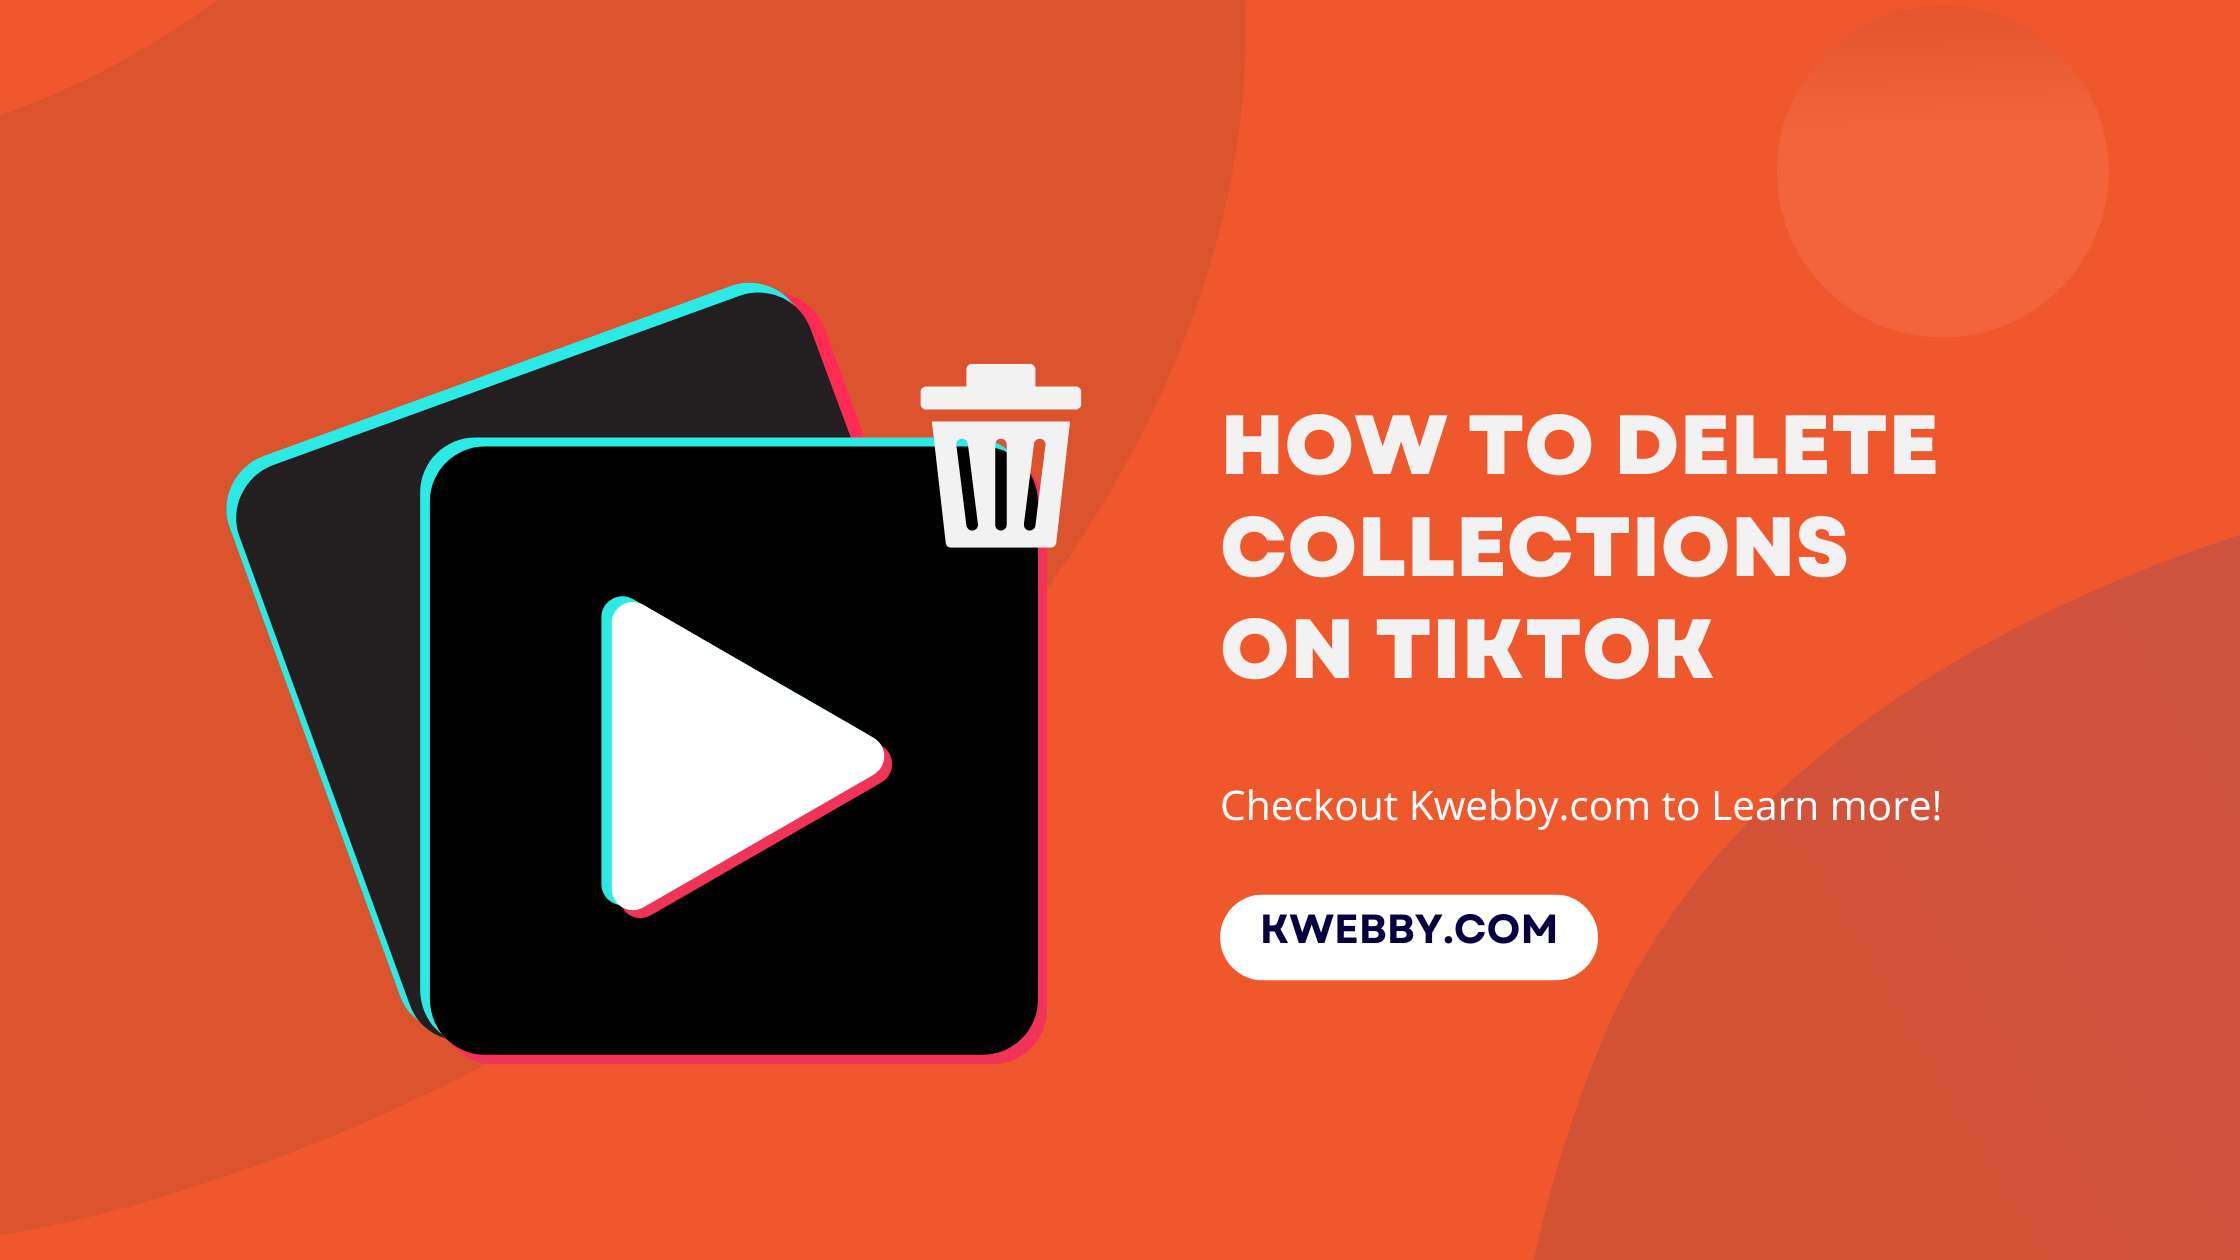 Discover how to effortlessly delete collections on TikTok with our simple 4-step guide.